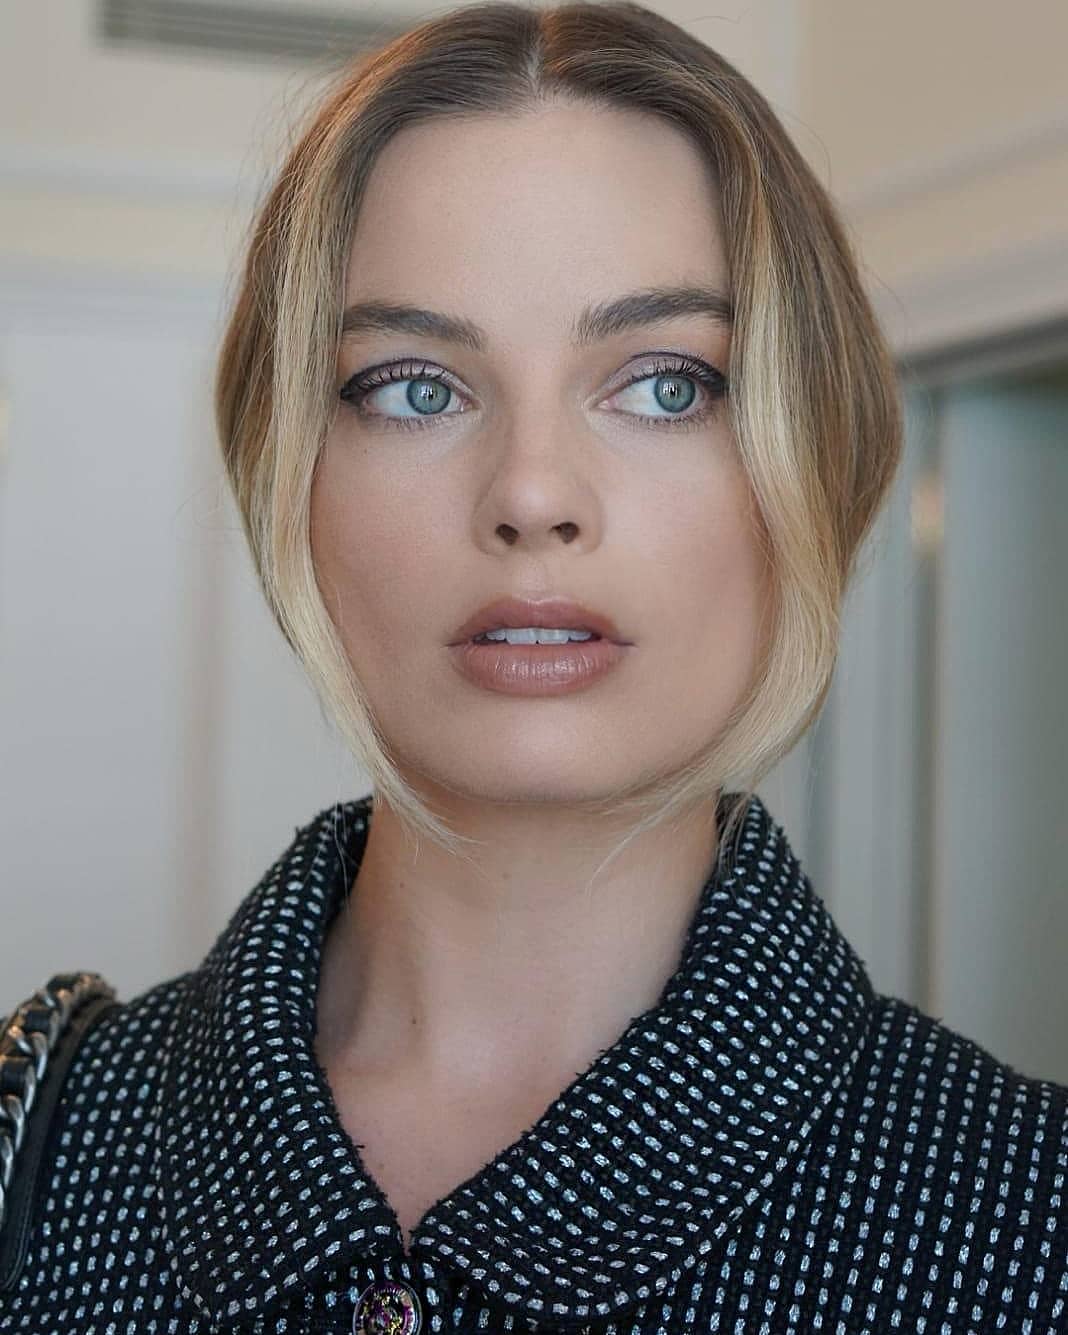 Blonde Bob Hairstyles to inspire: @patidubroff showing off Margot Robbie's long blonde bob tied up